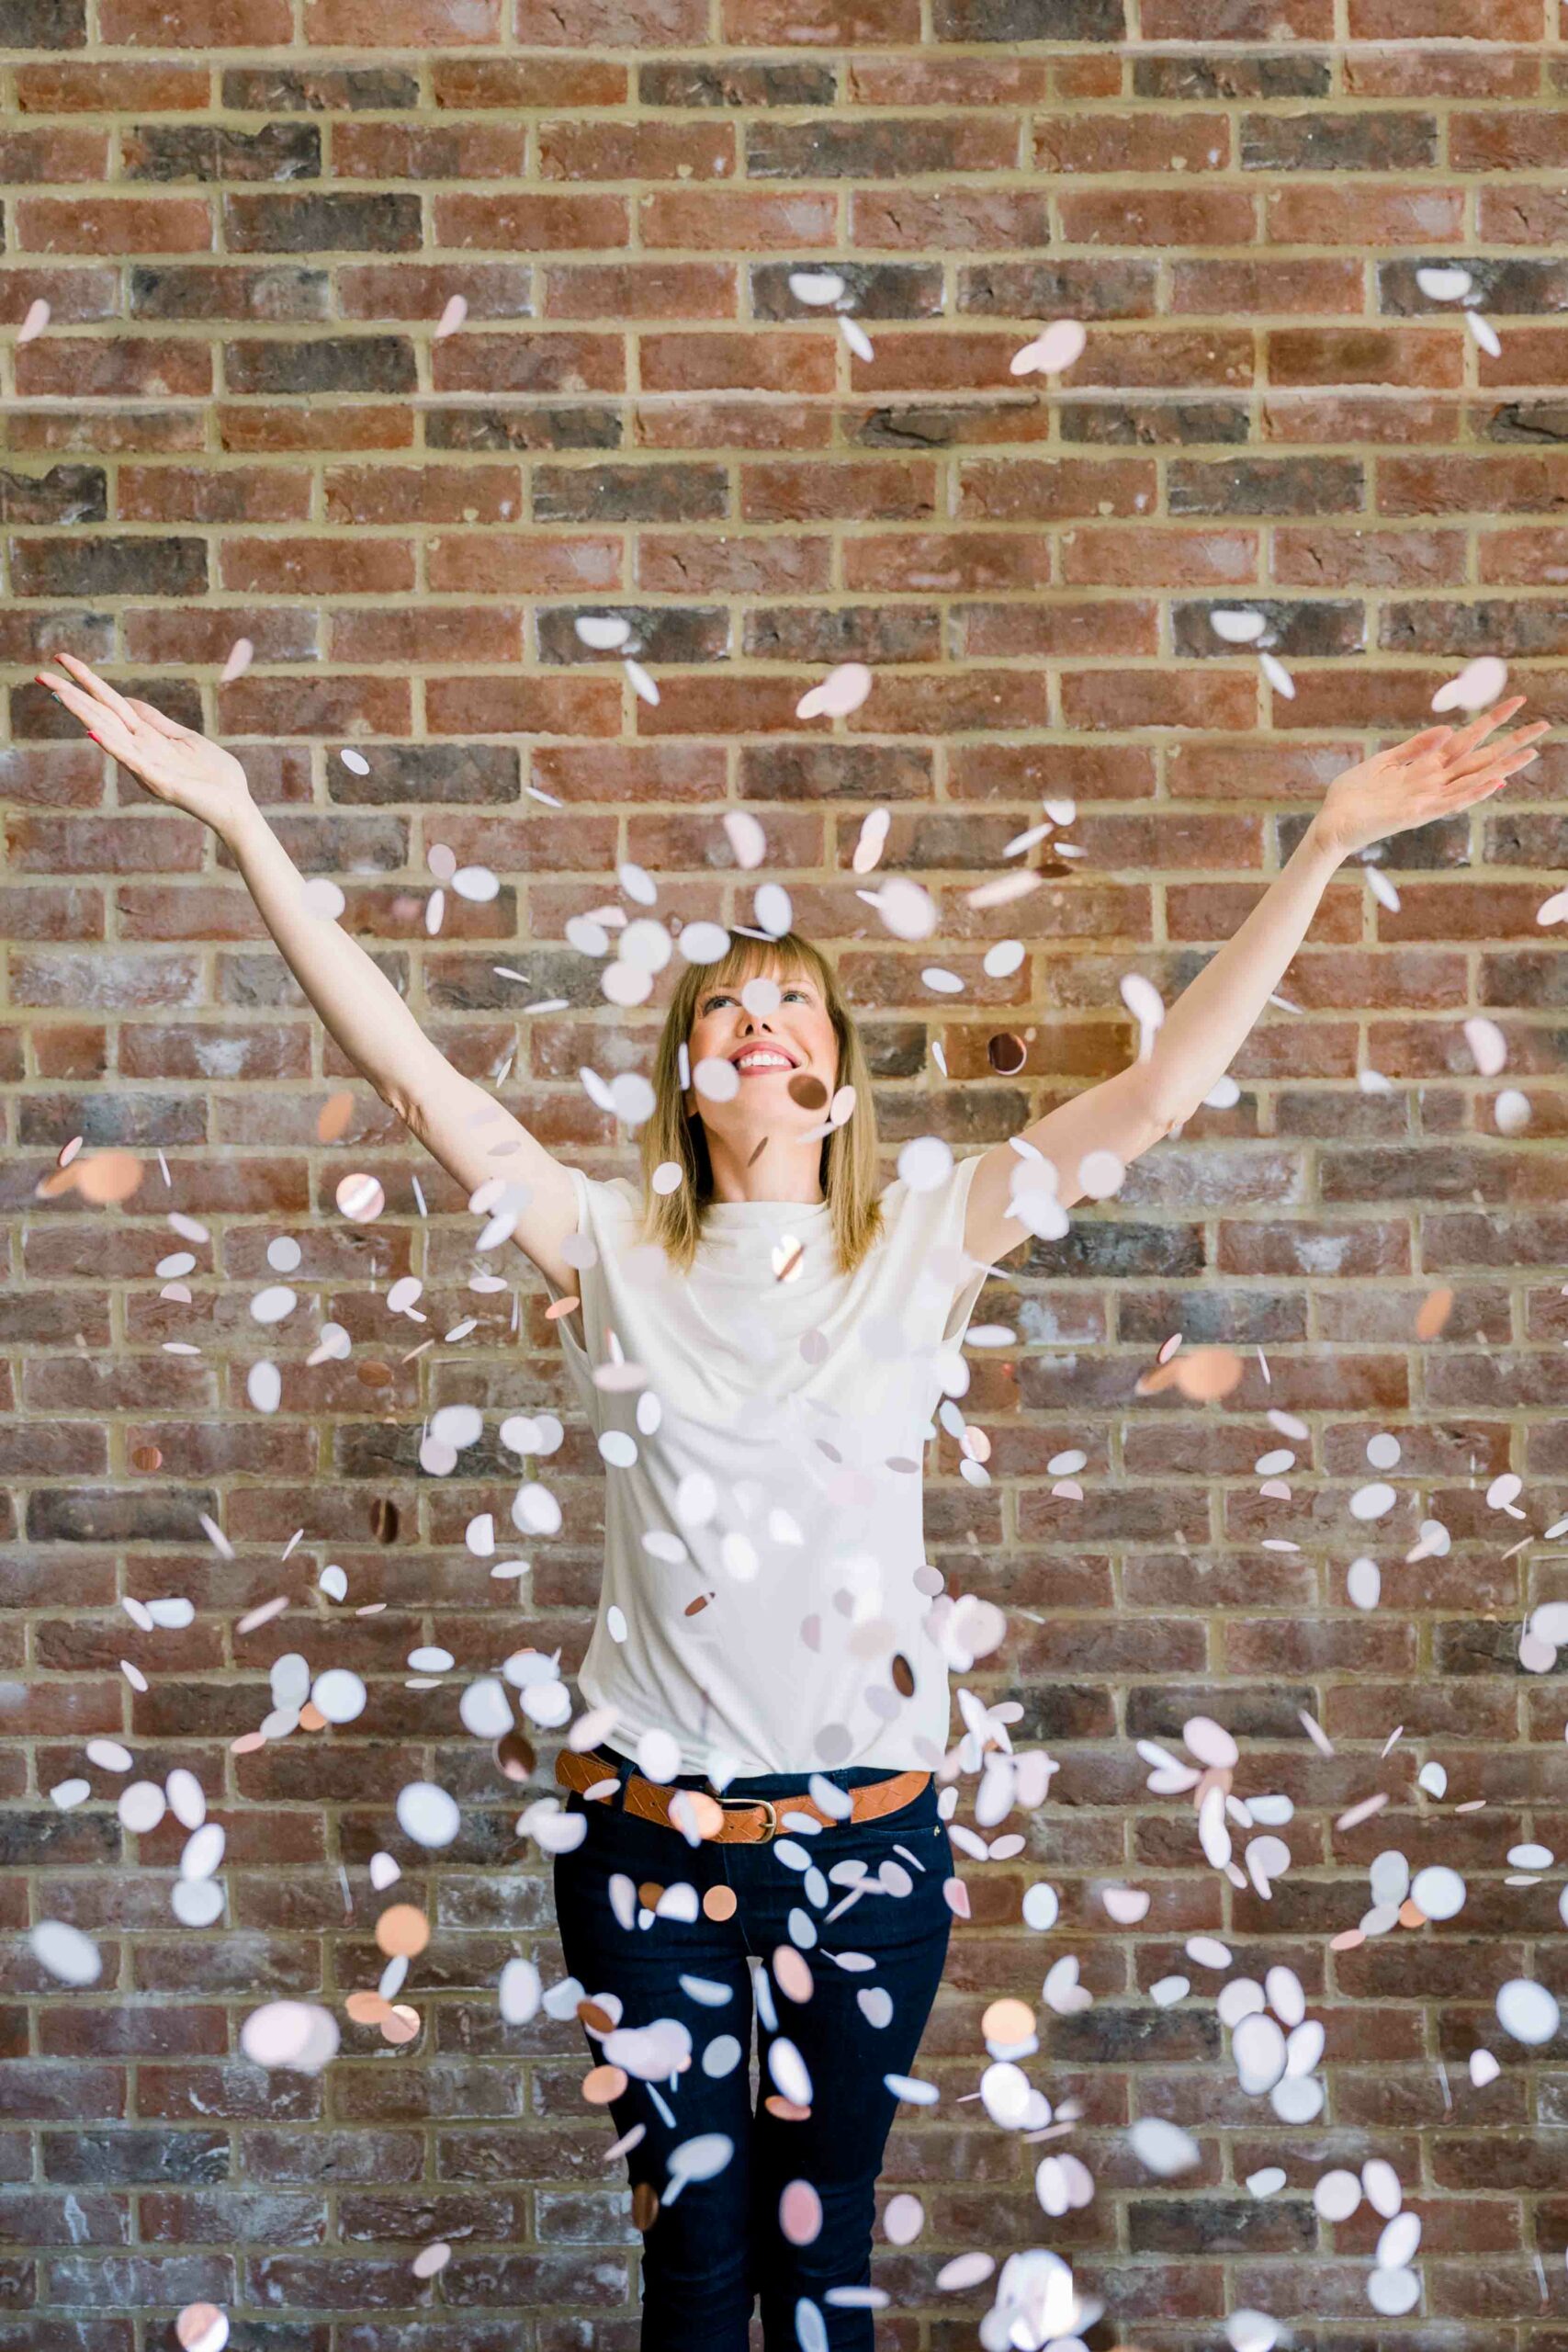 Women throwing confetti in the air in front of a brick wall